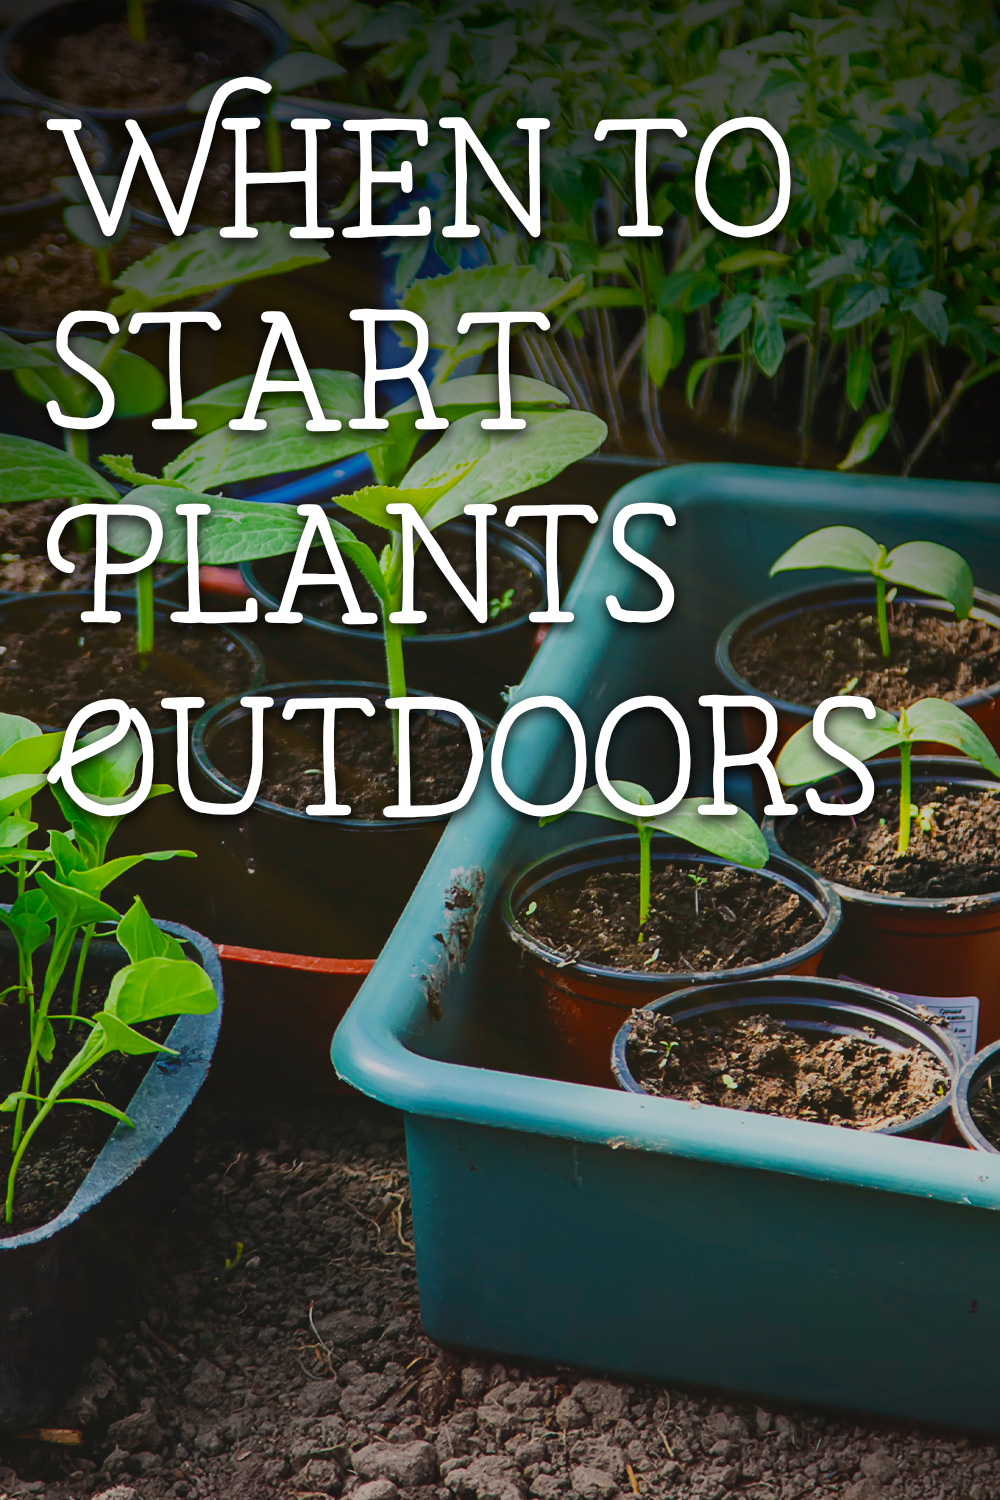 When to start plants outdoors